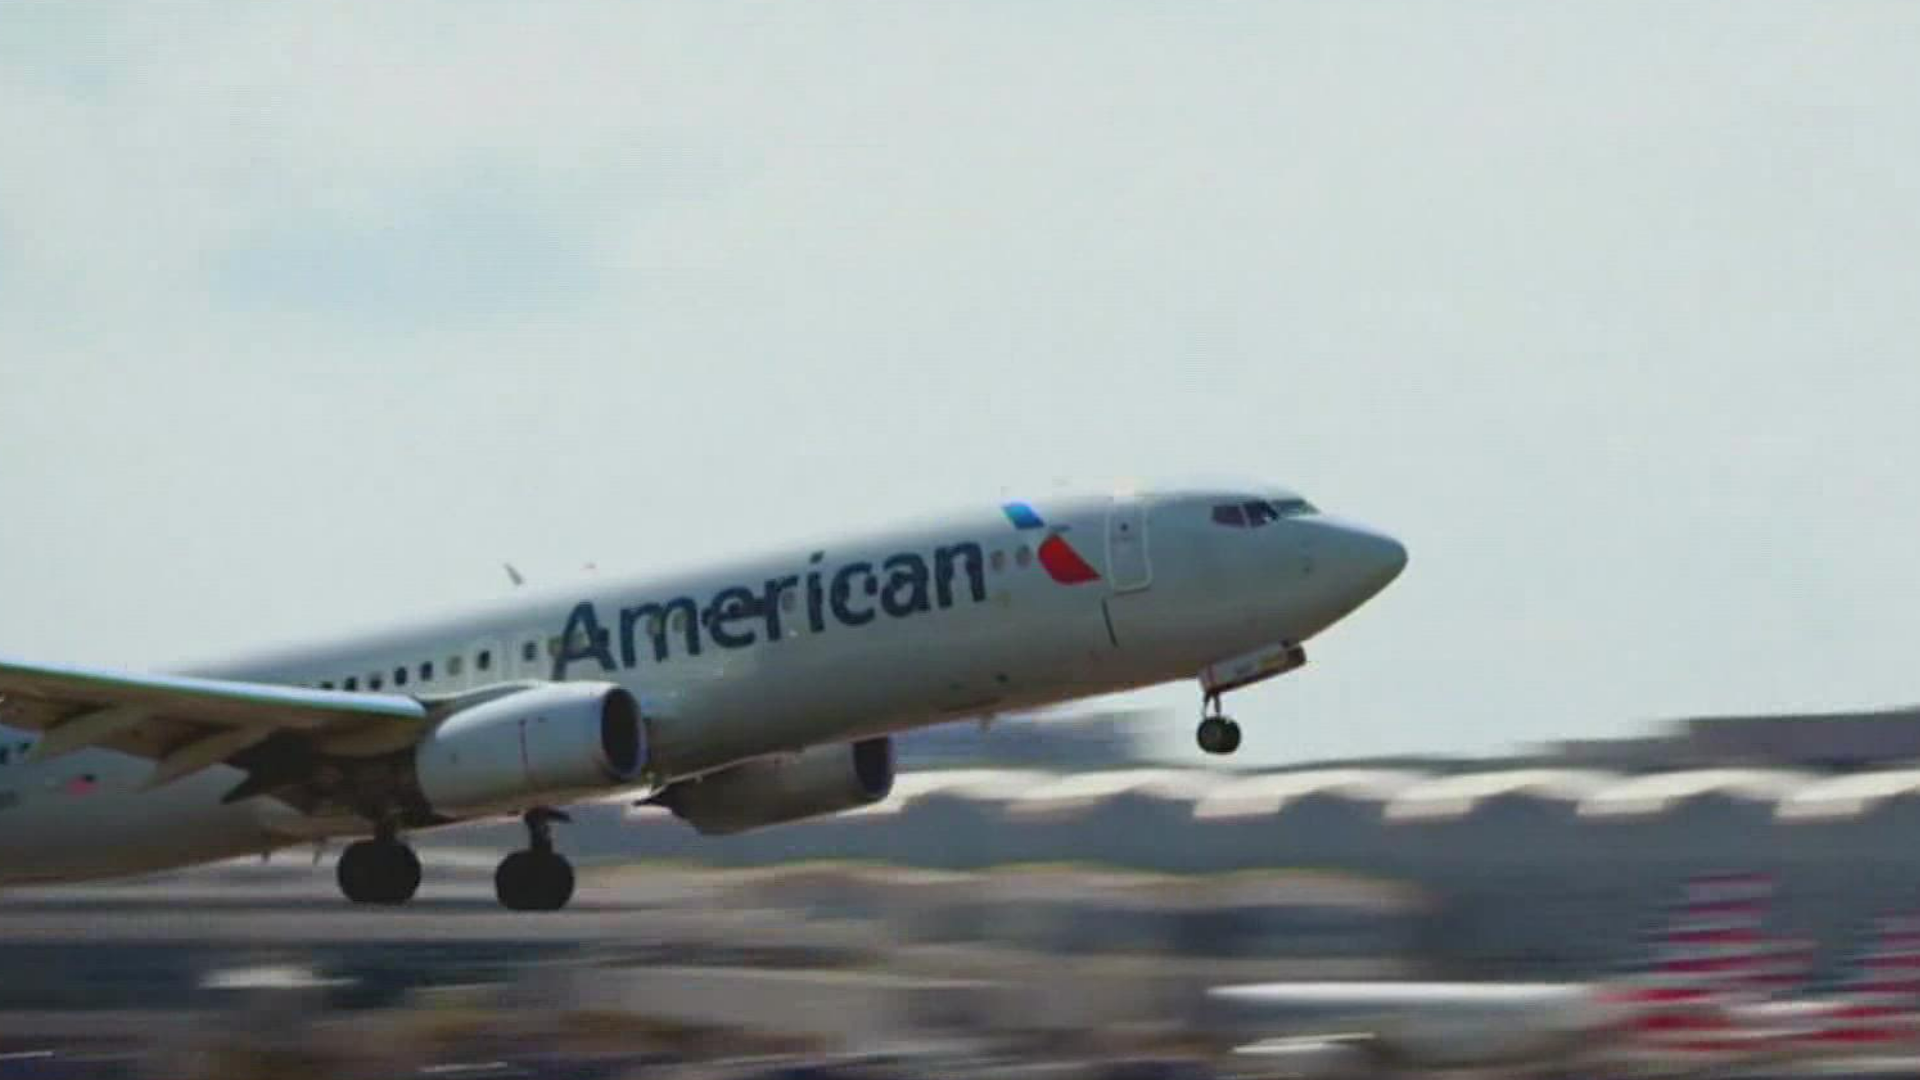 The flight will run Sunday through Friday and American will operate a 76-seat Embraer 175 aircraft for the route.